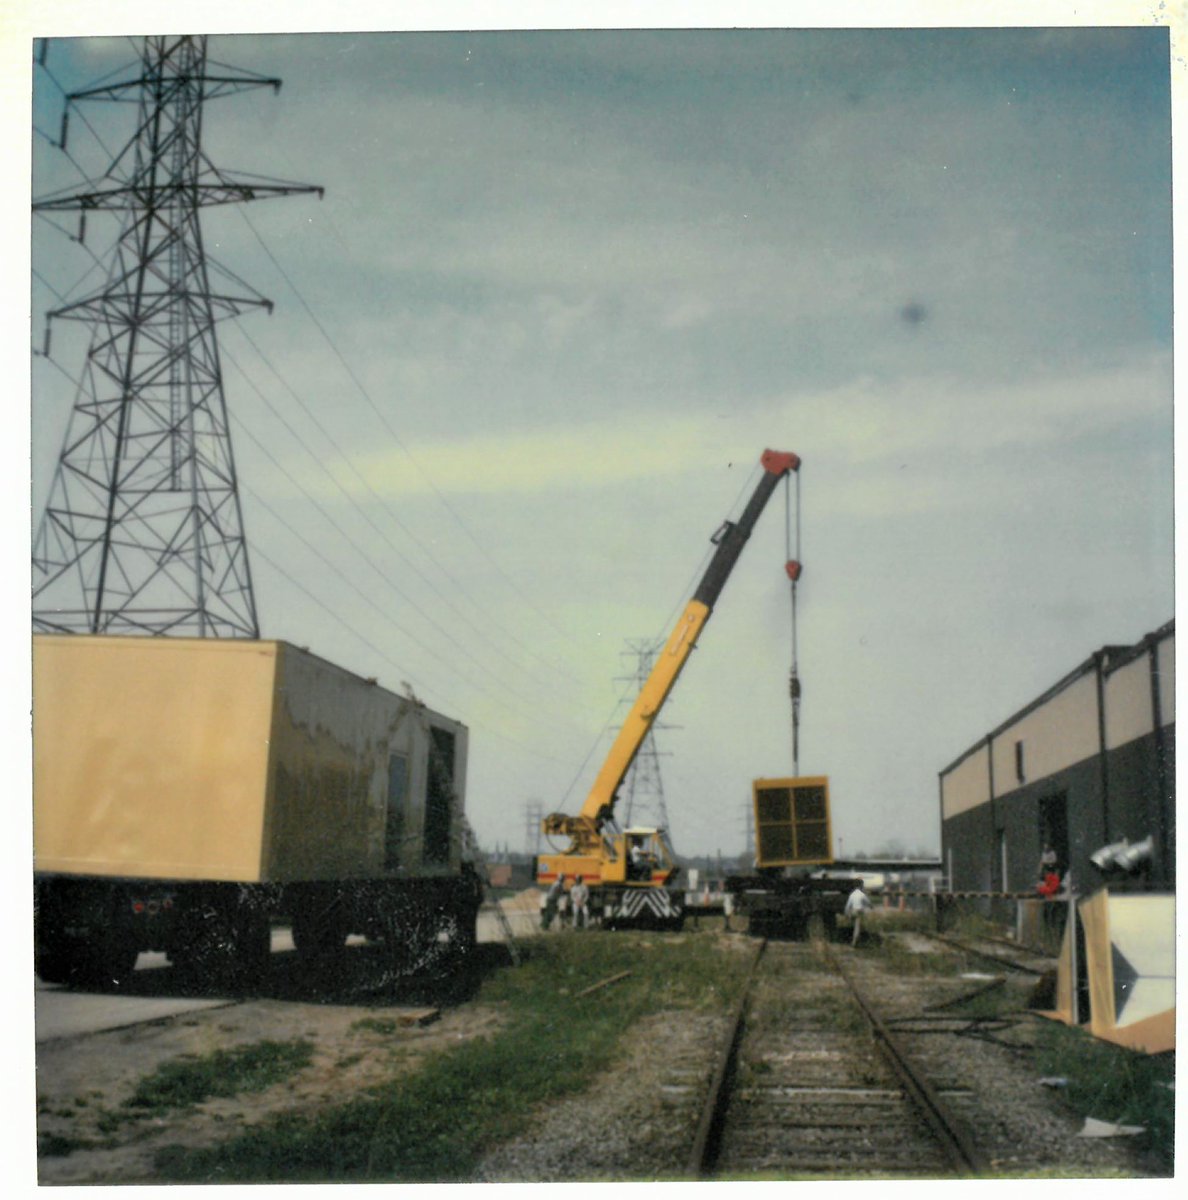 Did you know we've shipped projects by railroad? At Enercon, we offer multiple transport options: 🚂 Rail (Union Pacific), 🚚 Highway (I-74, I-55, I-155), ✈️ Air (PIA, BMI), 🚤 Waterway (M-55). Here’s a throwback of us loading a generator.
#EnerconPower #LogisticsExcellence